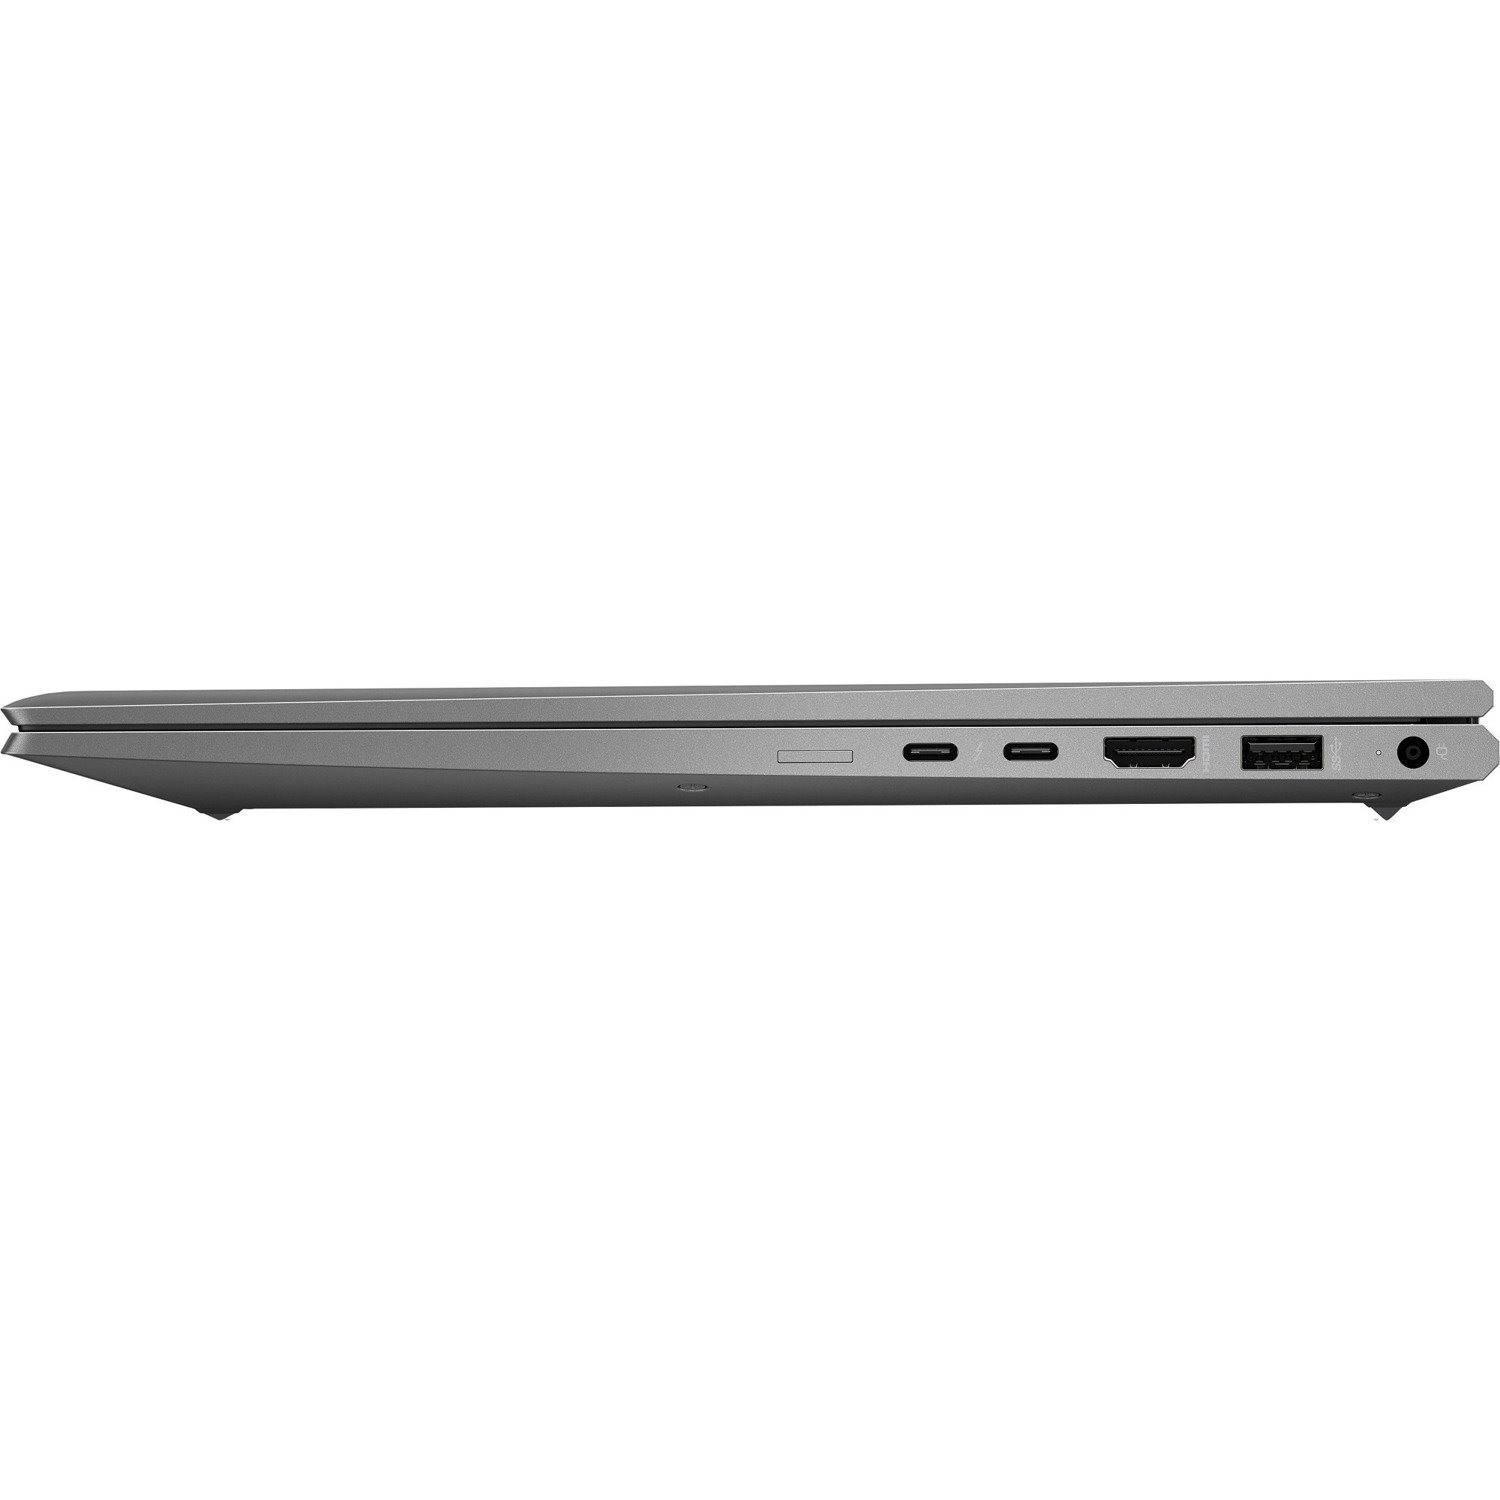 HP ZBook Firefly G8 15.6" Mobile Workstation - Full HD - Intel Core i7 11th Gen i7-1165G7 - 16 GB - 512 GB SSD